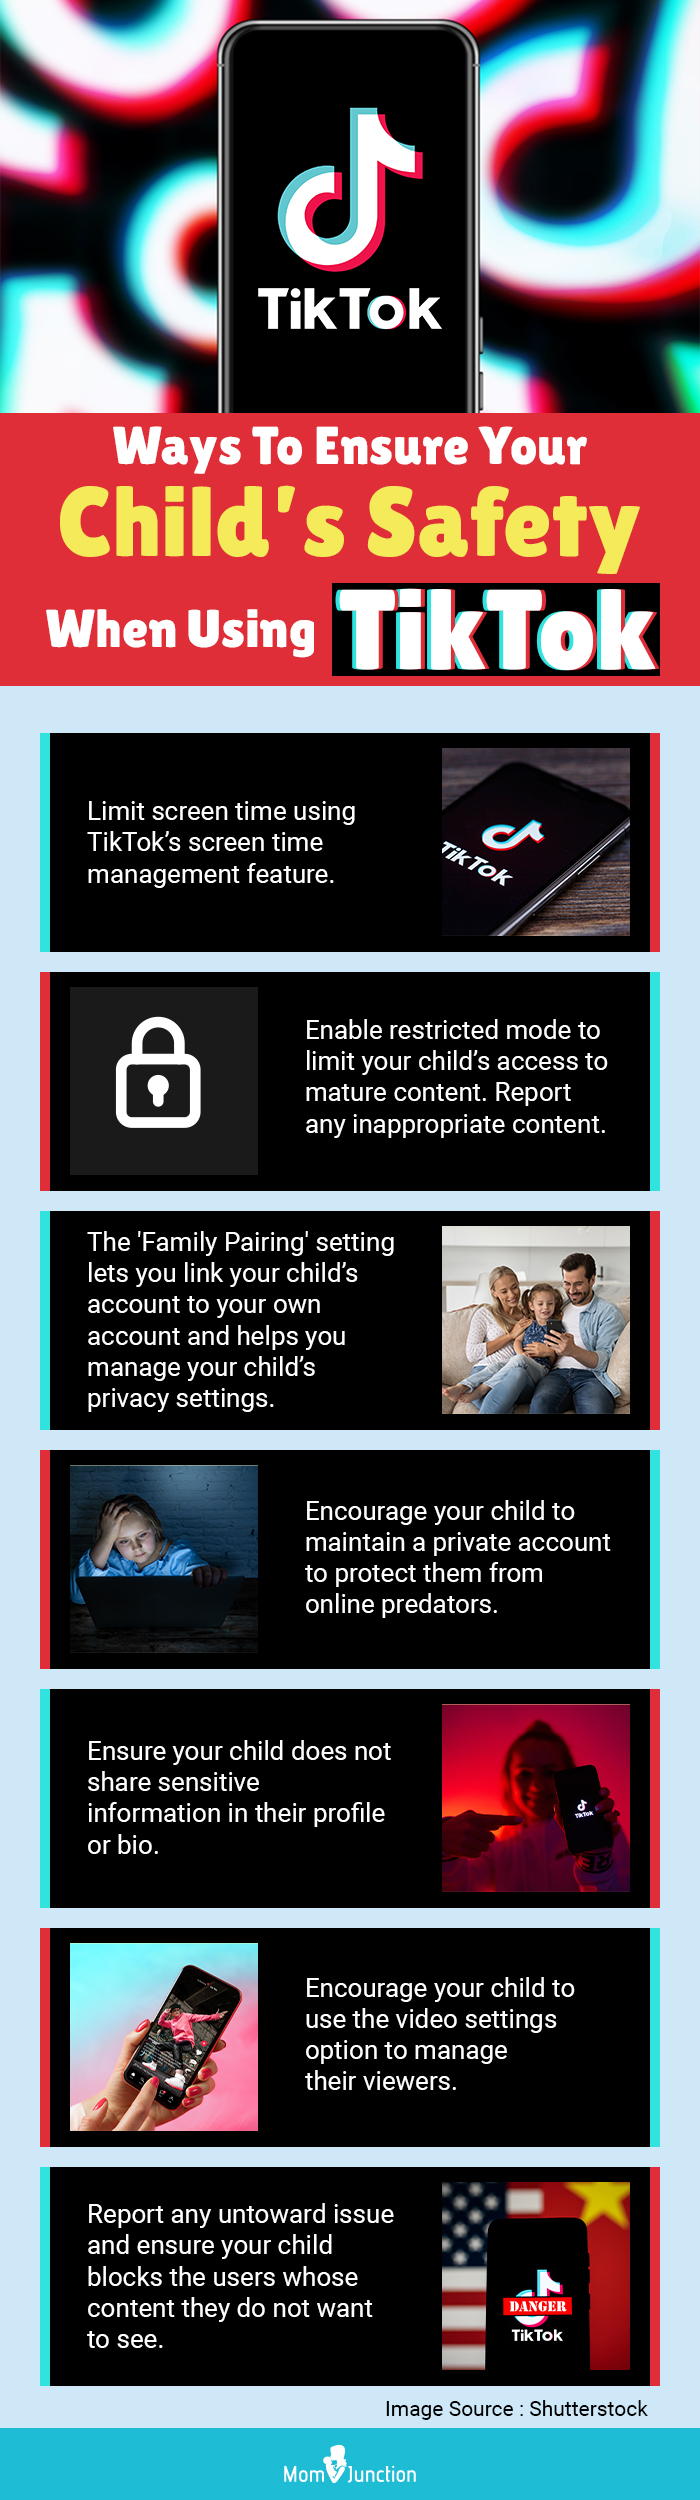 ways to ensure your child’s safety when using tiktok(infographic)